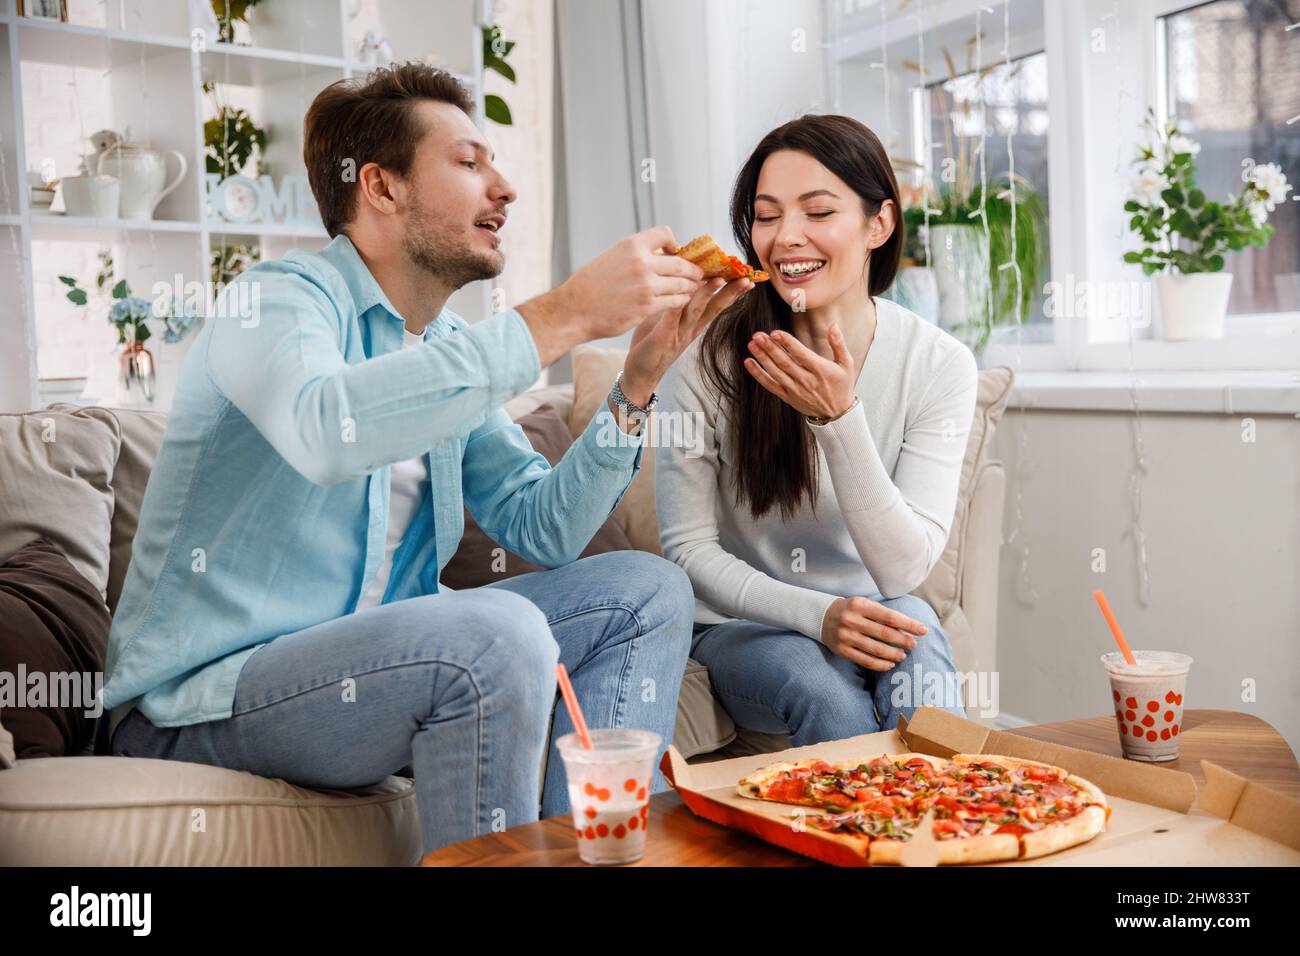 Couple sharing pizza and eating Stock Photo